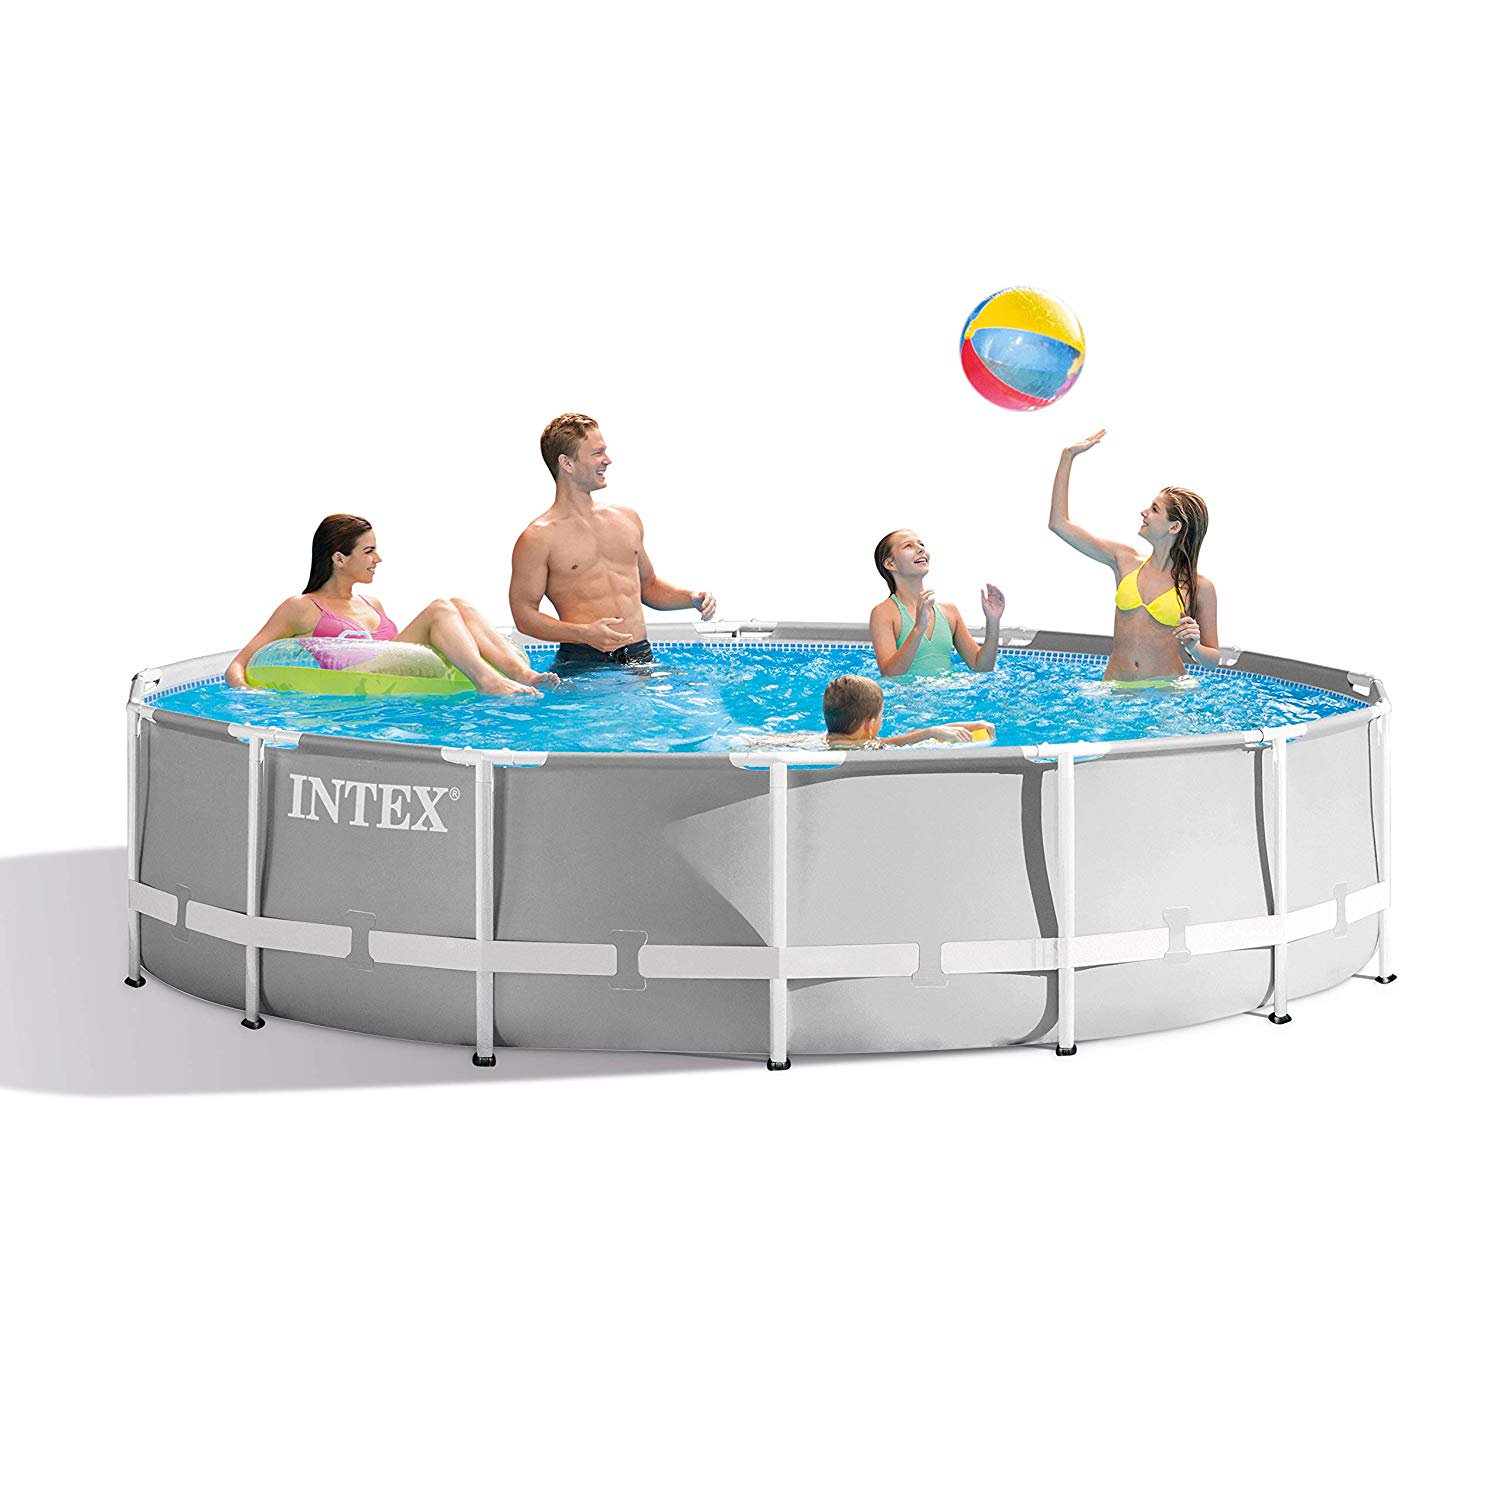 Intex 14 Foot x 42 Inch Prism Frame Above Ground Swimming Pool Set with Filter